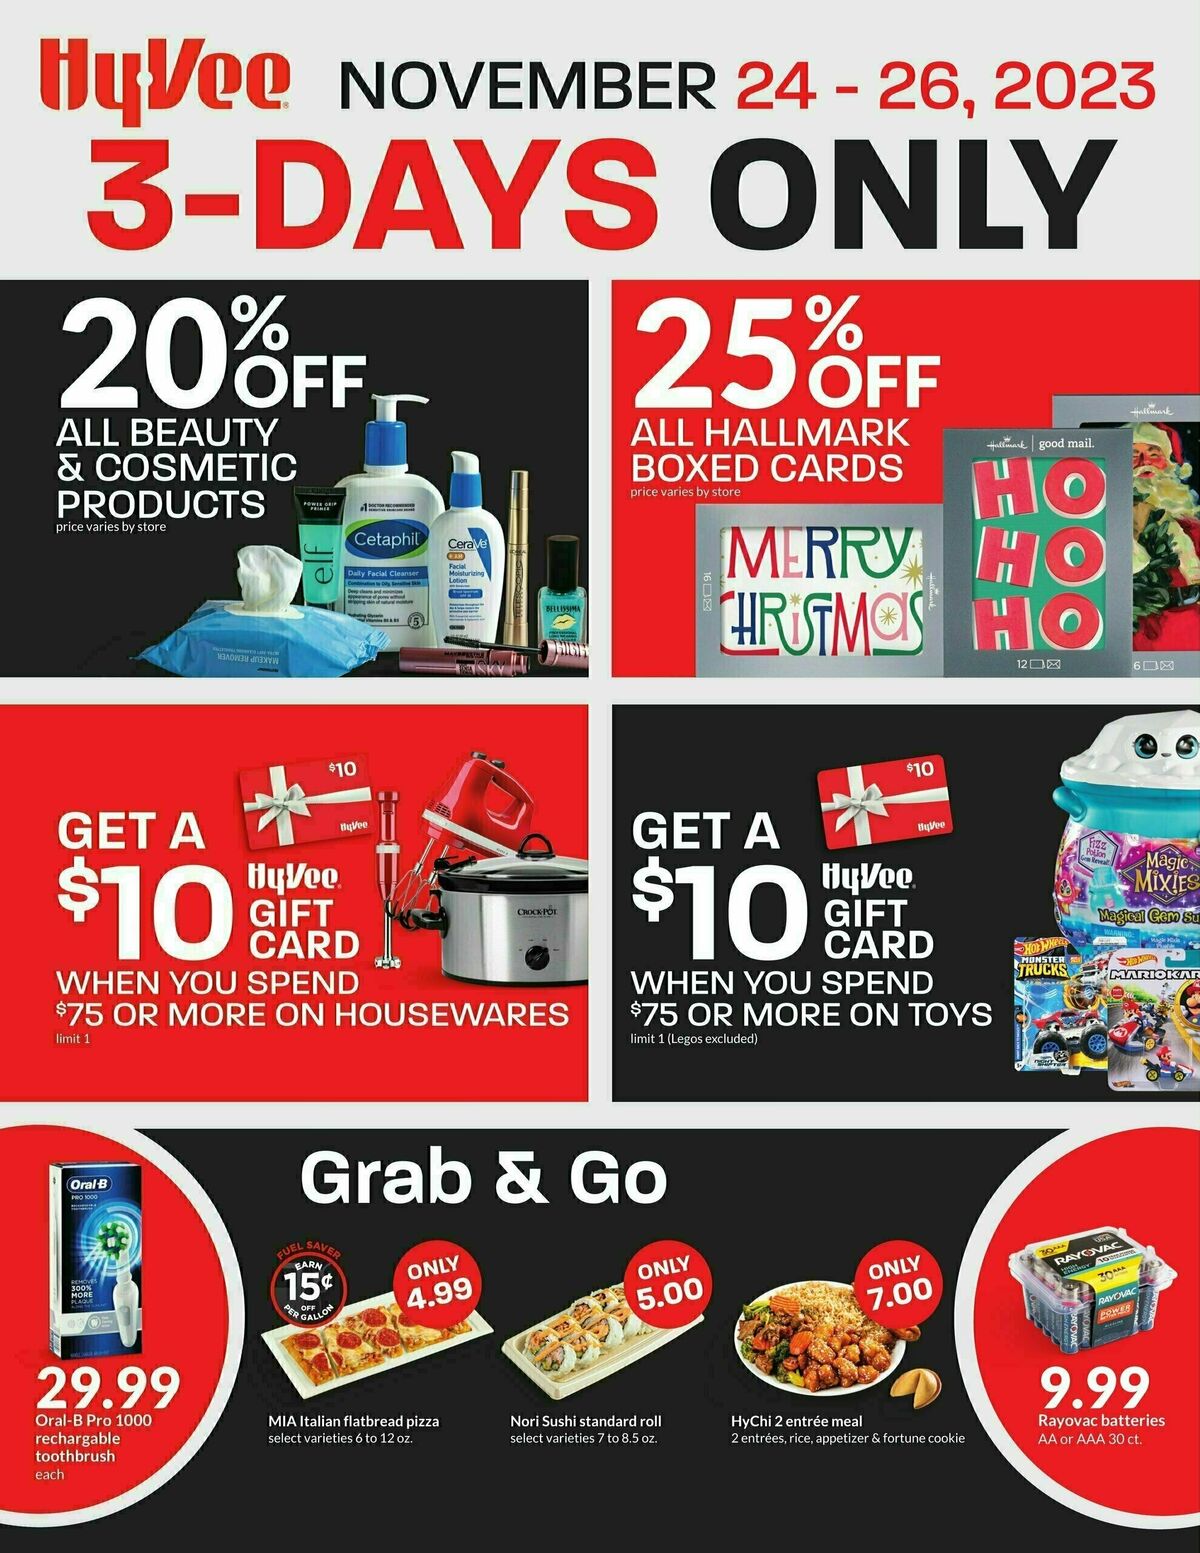 HyVee 3 Days Only Deals & Ads from November 24